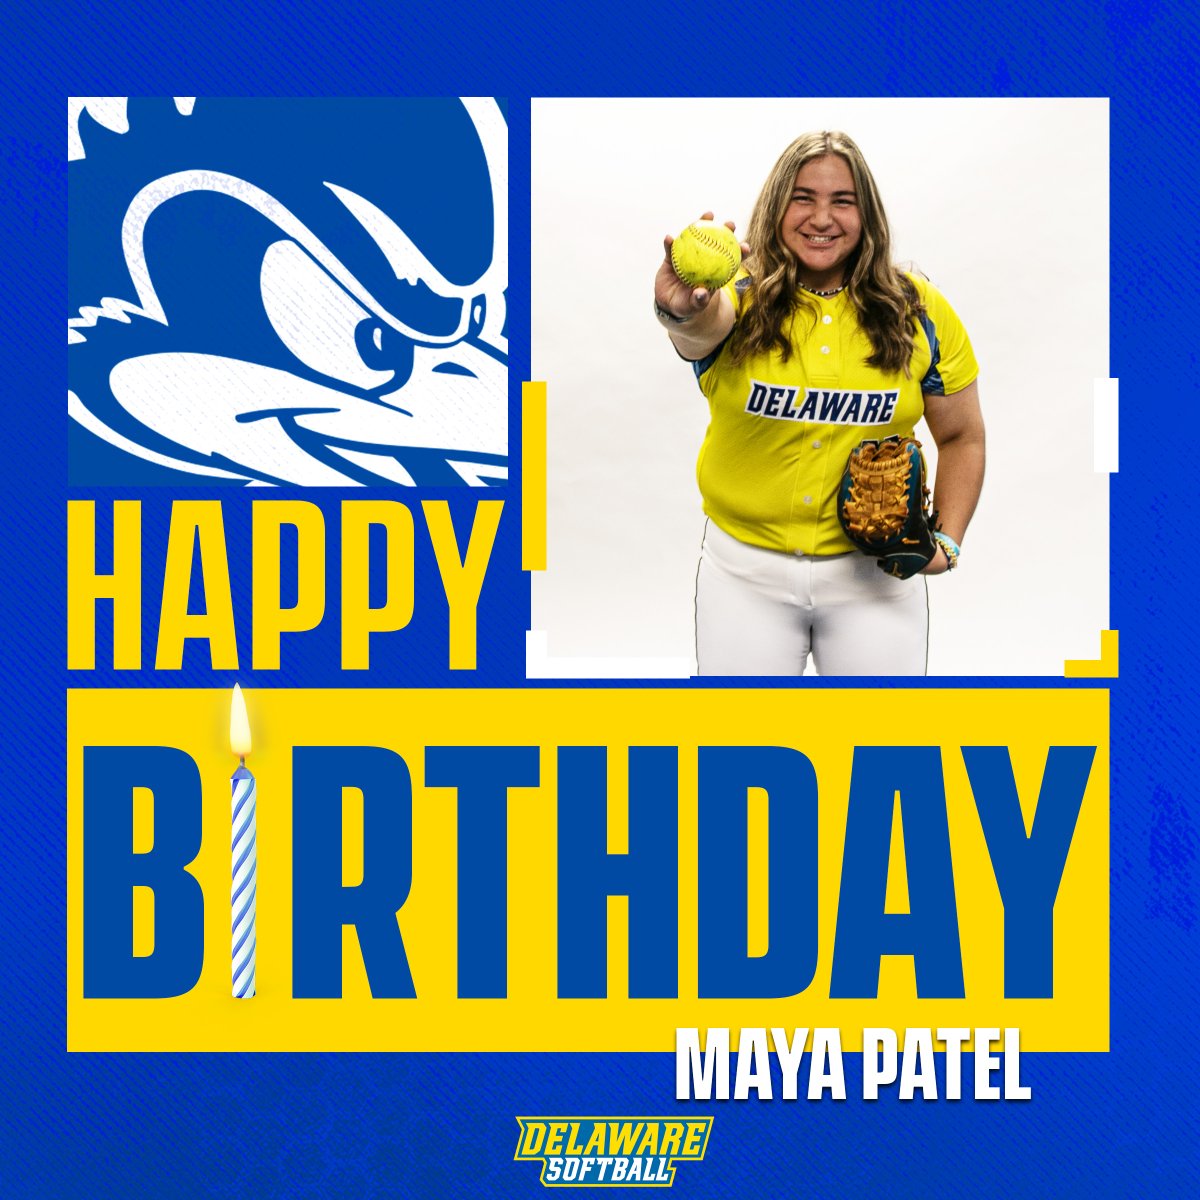 We got a couple of birthdays today! Have a great day @zoey1414 and @maya_patell!